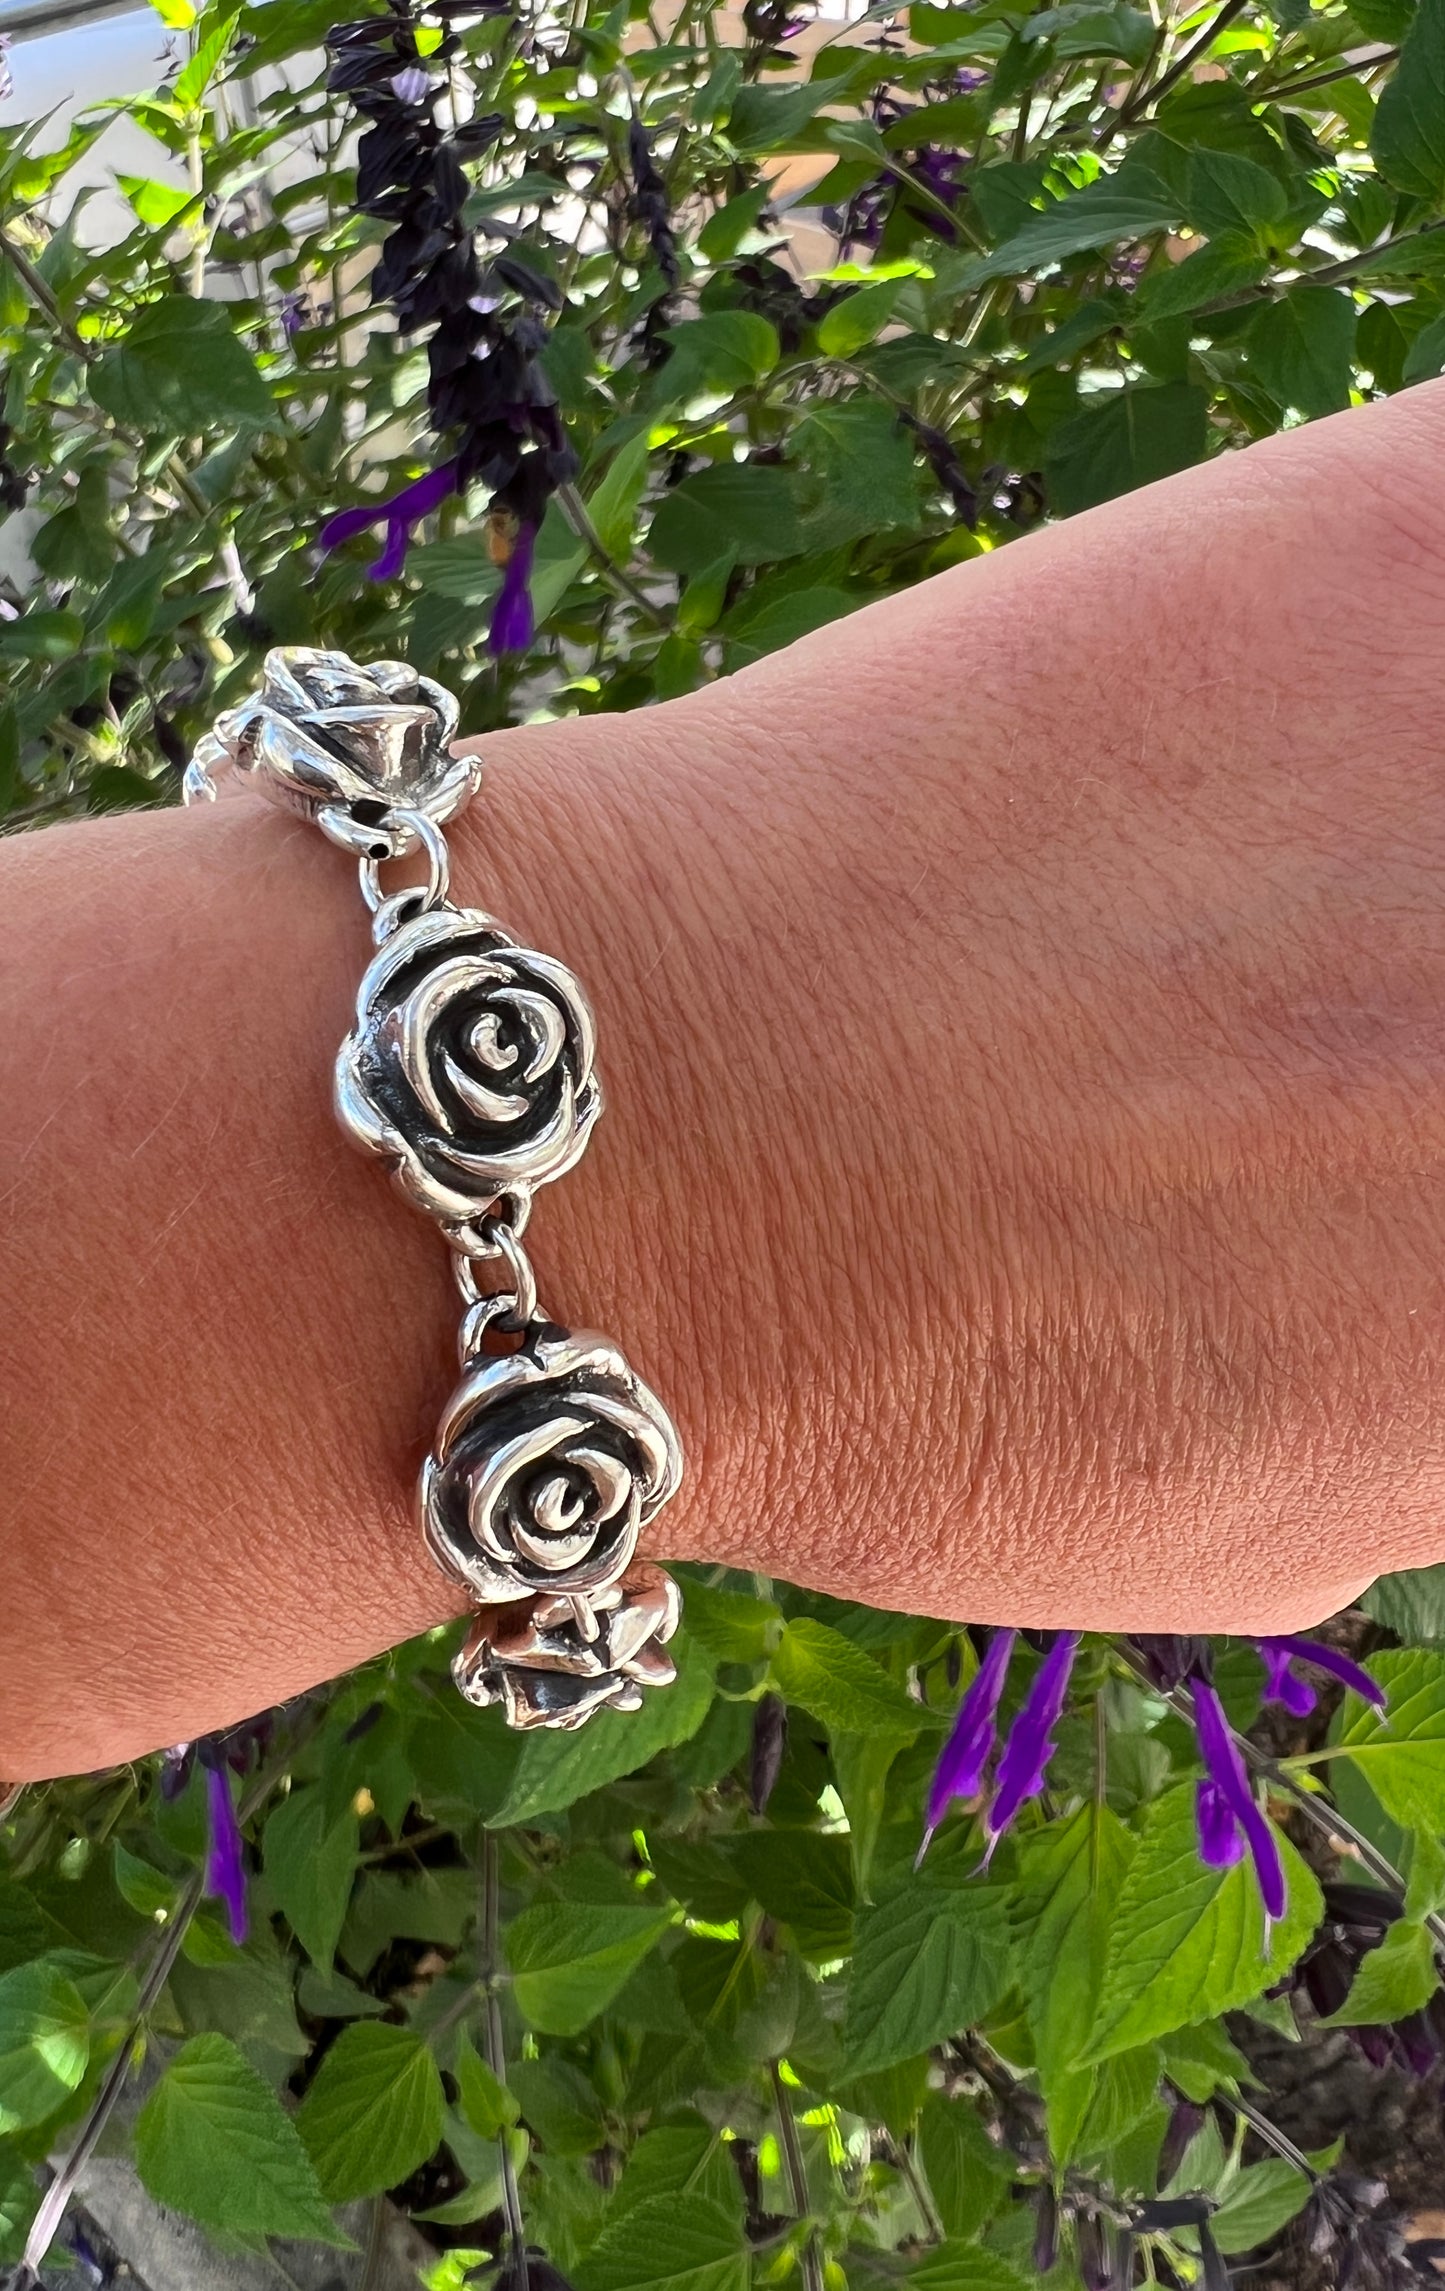 A woman's hand is holding a Super Silver Chic Link Rose Bracelet.